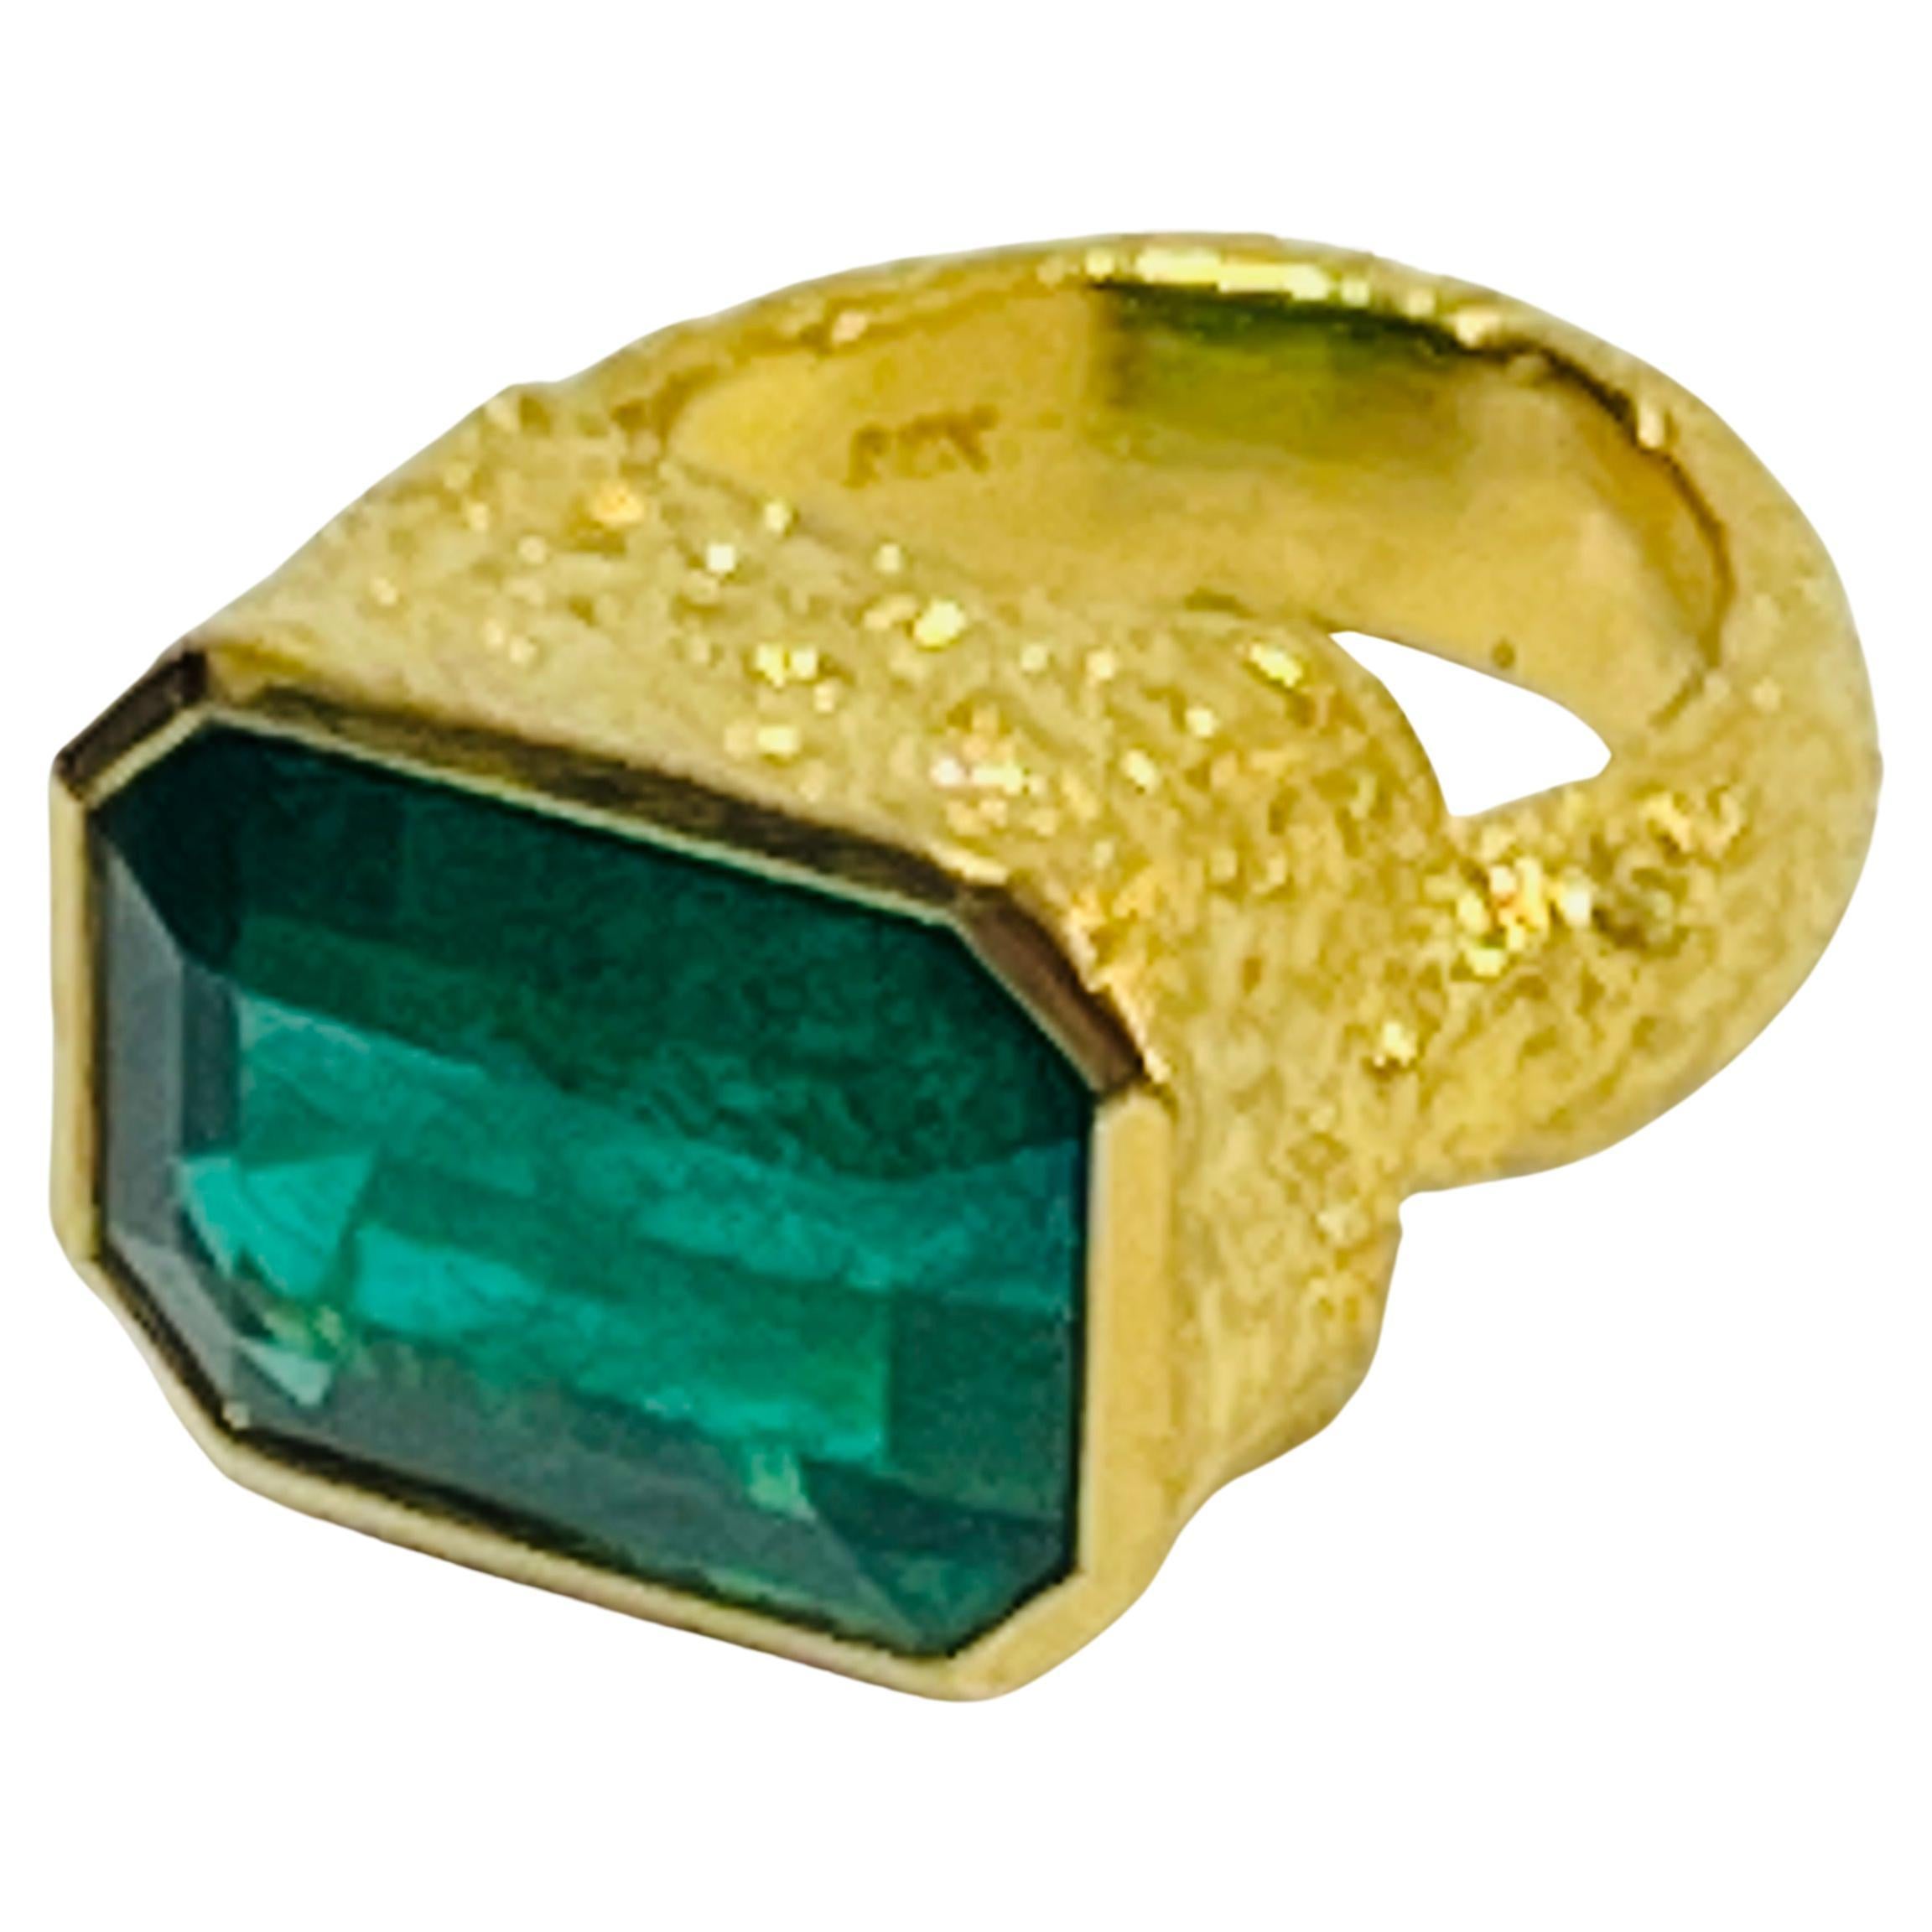 16k Emerald Cocktail Ring, by Tagili